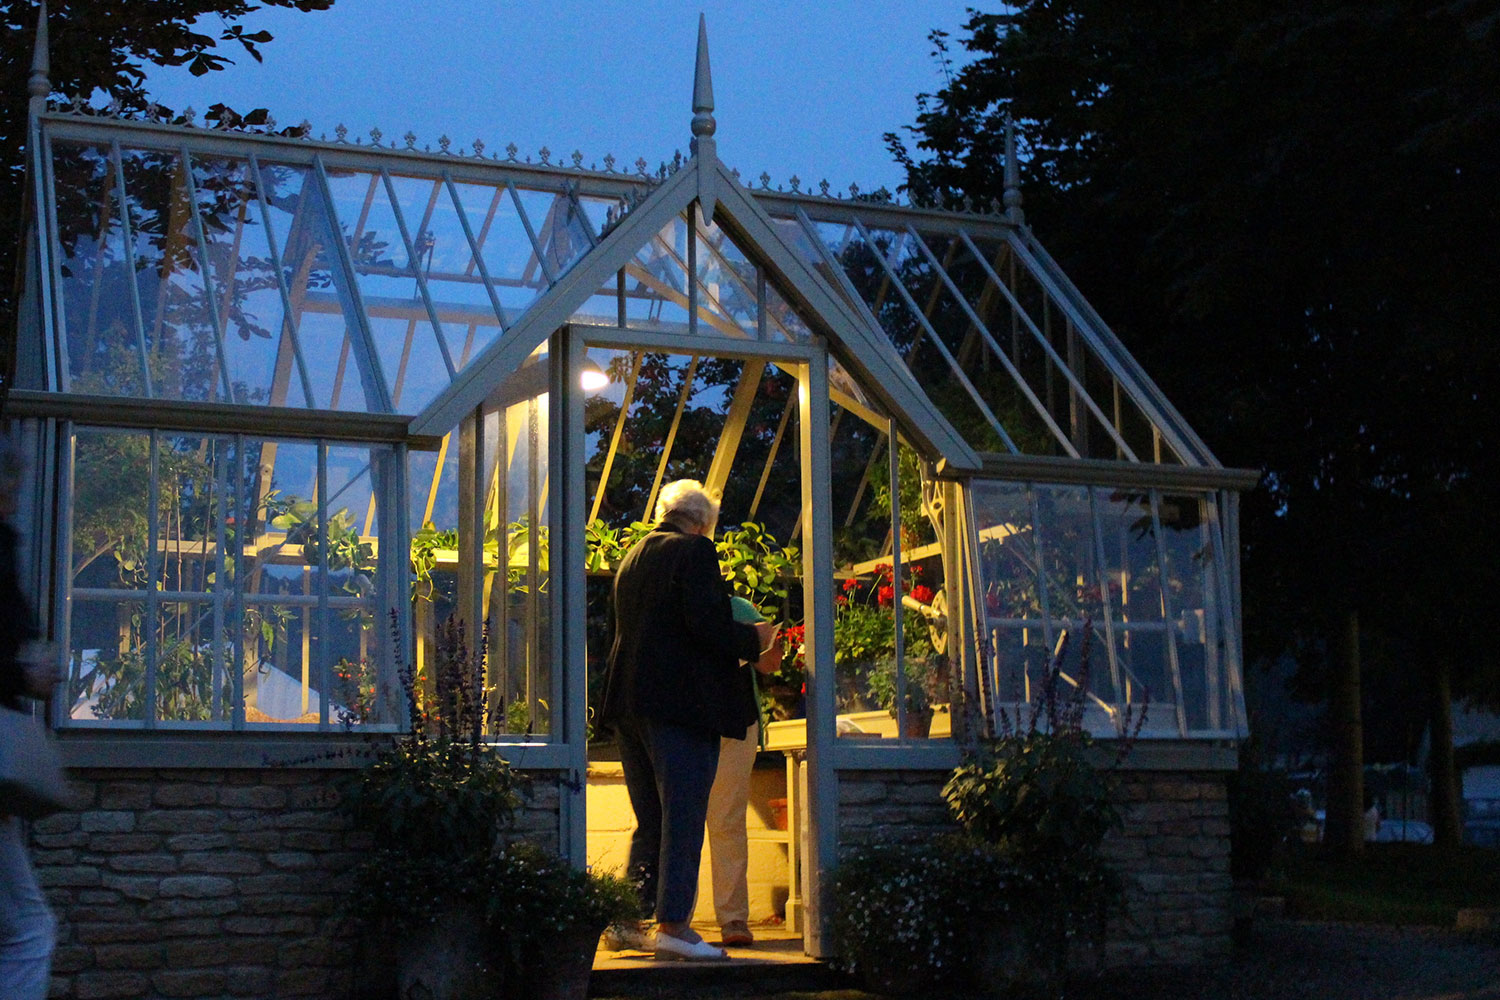 Greenhouse lights in use (Alitex greenhouse accessories)